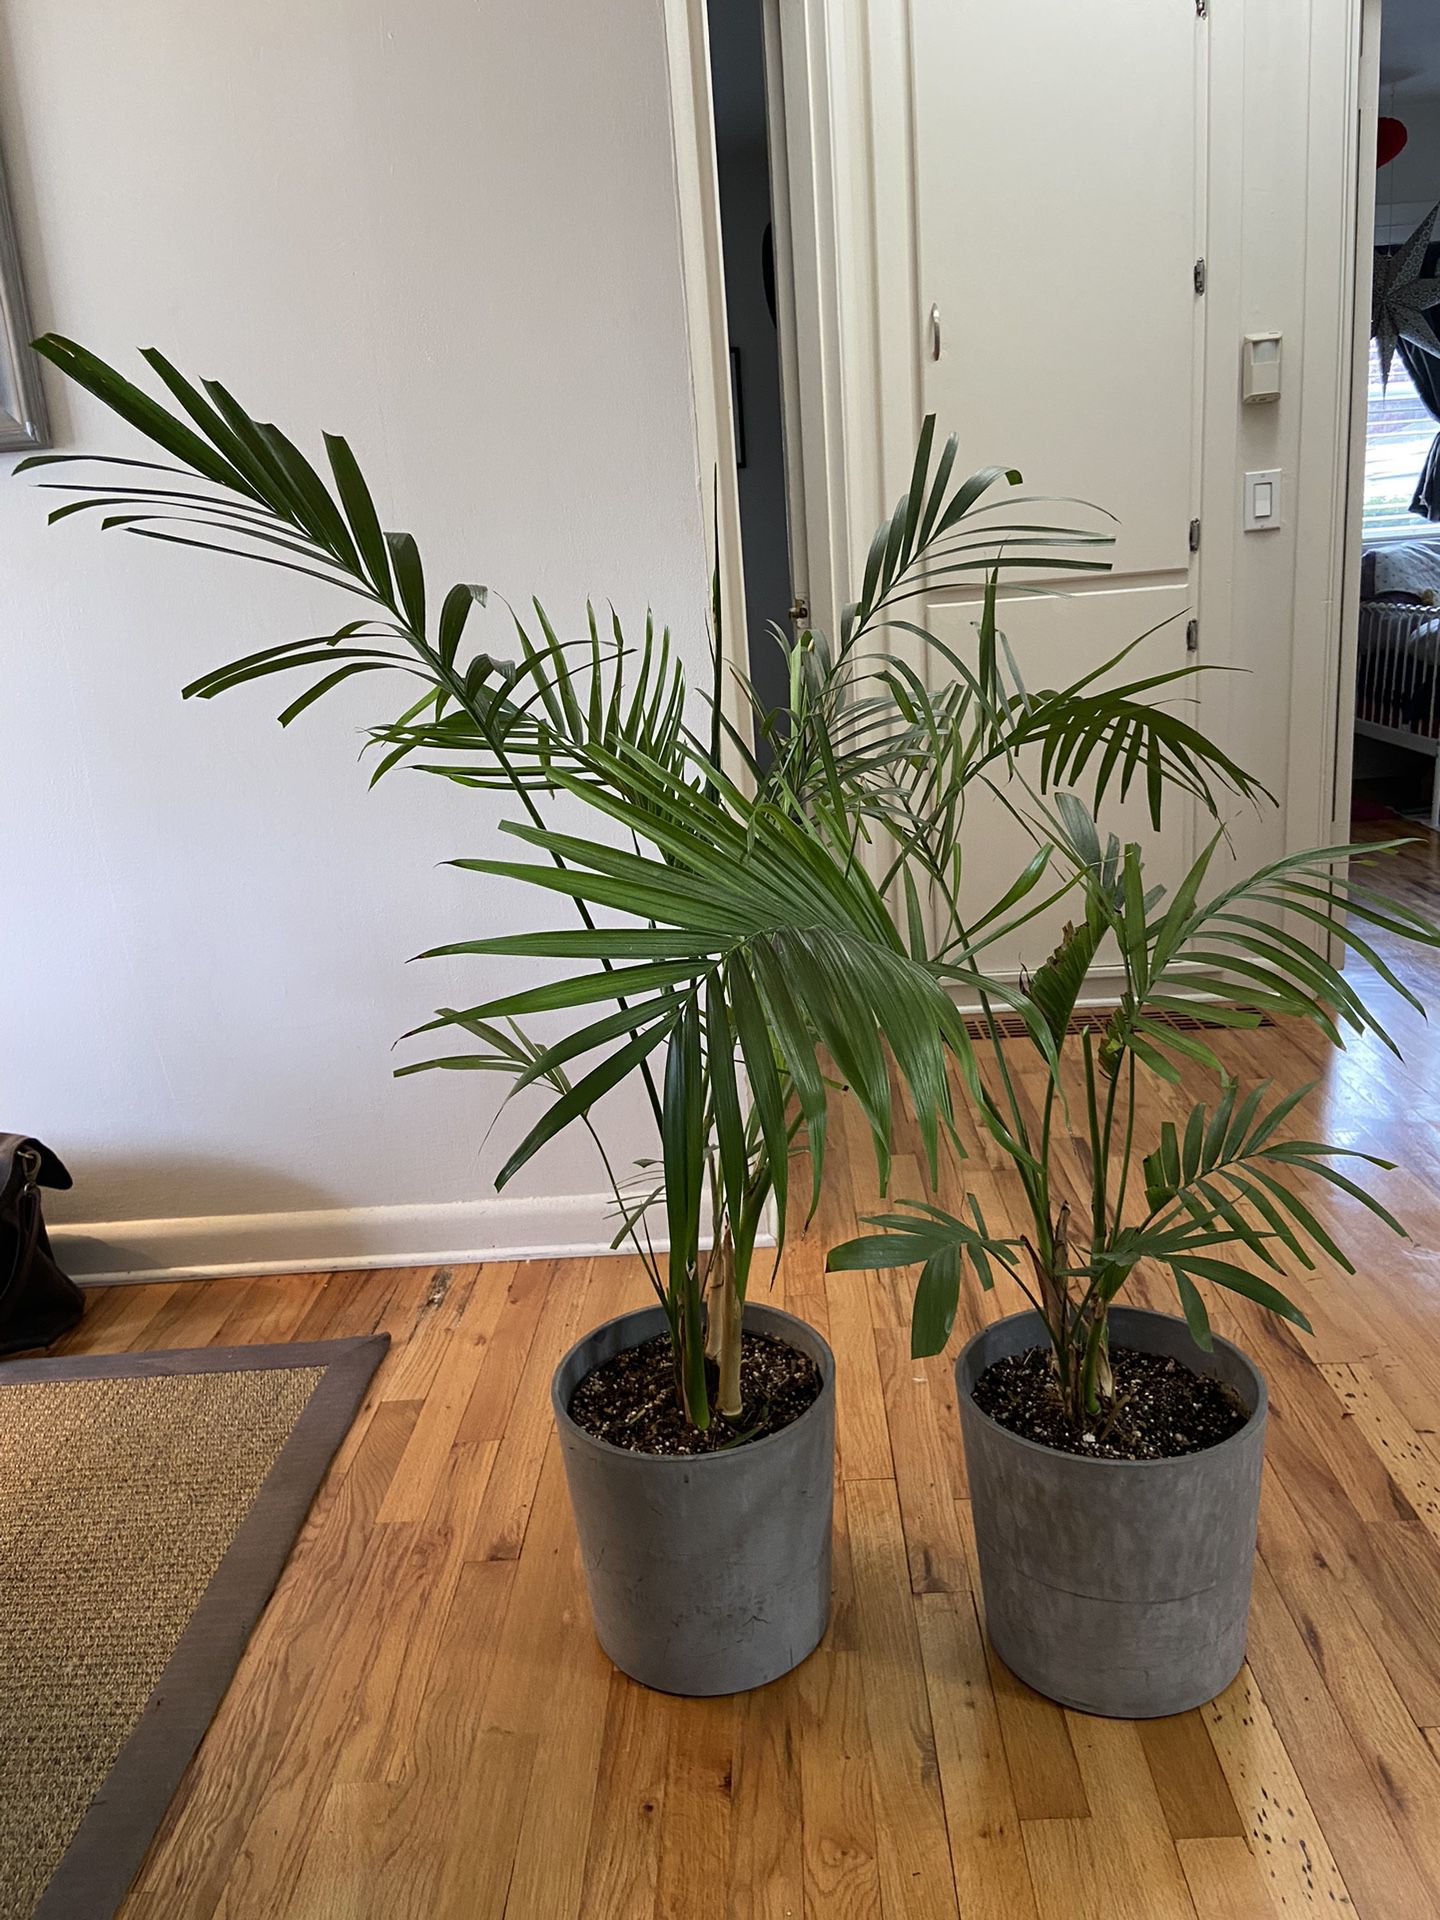 Indoor Tropical Plants With Pots $40 EACH 